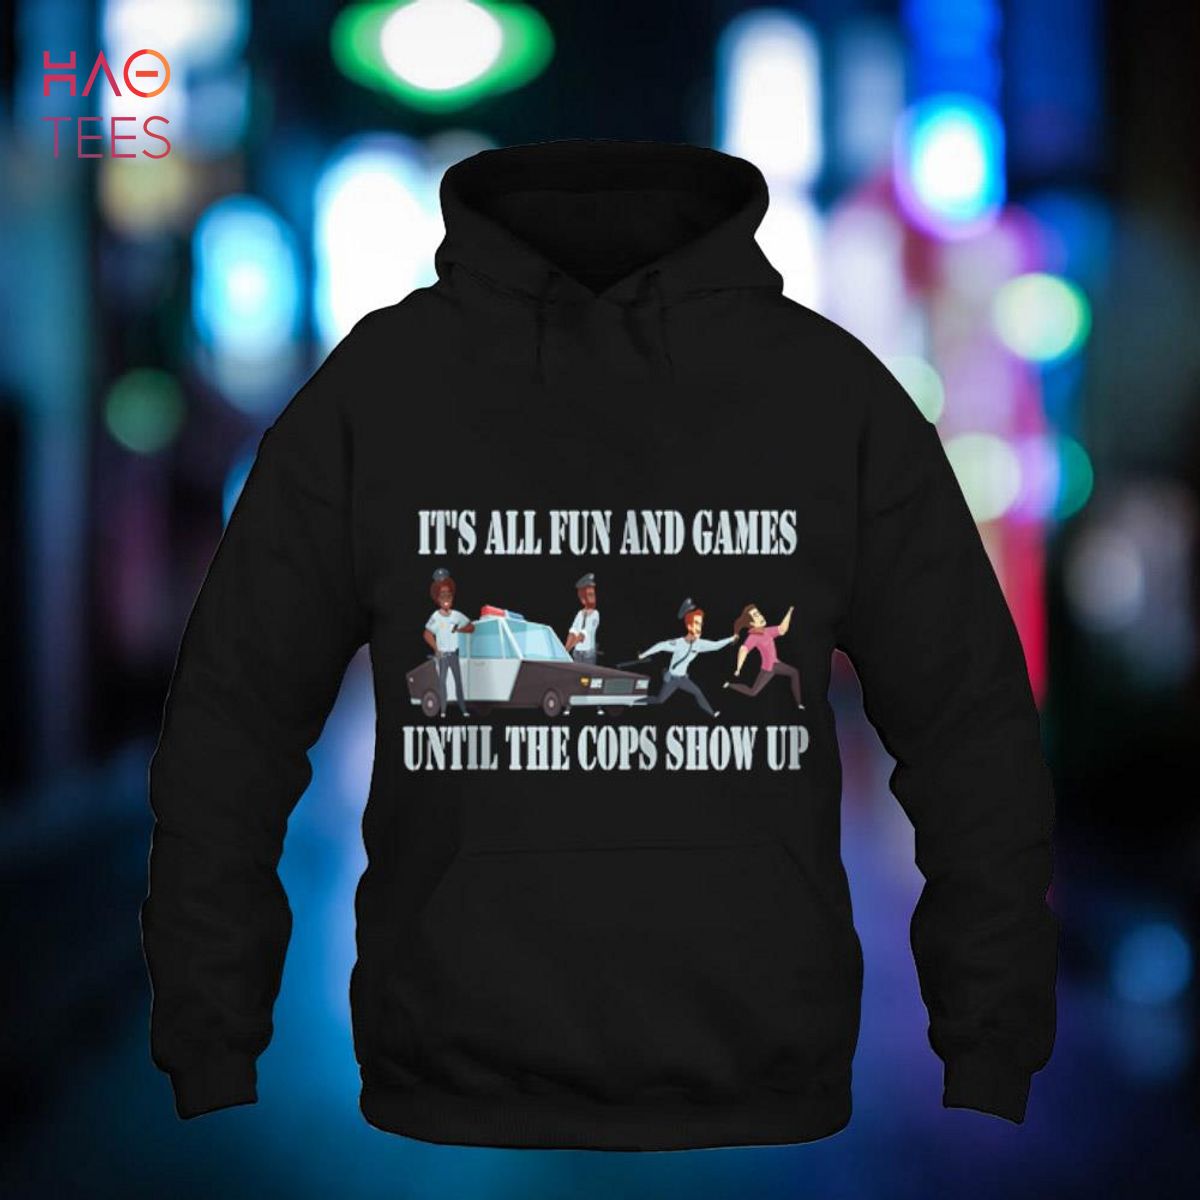 It’s All Fun And Games Until The Cops Show up Shirt